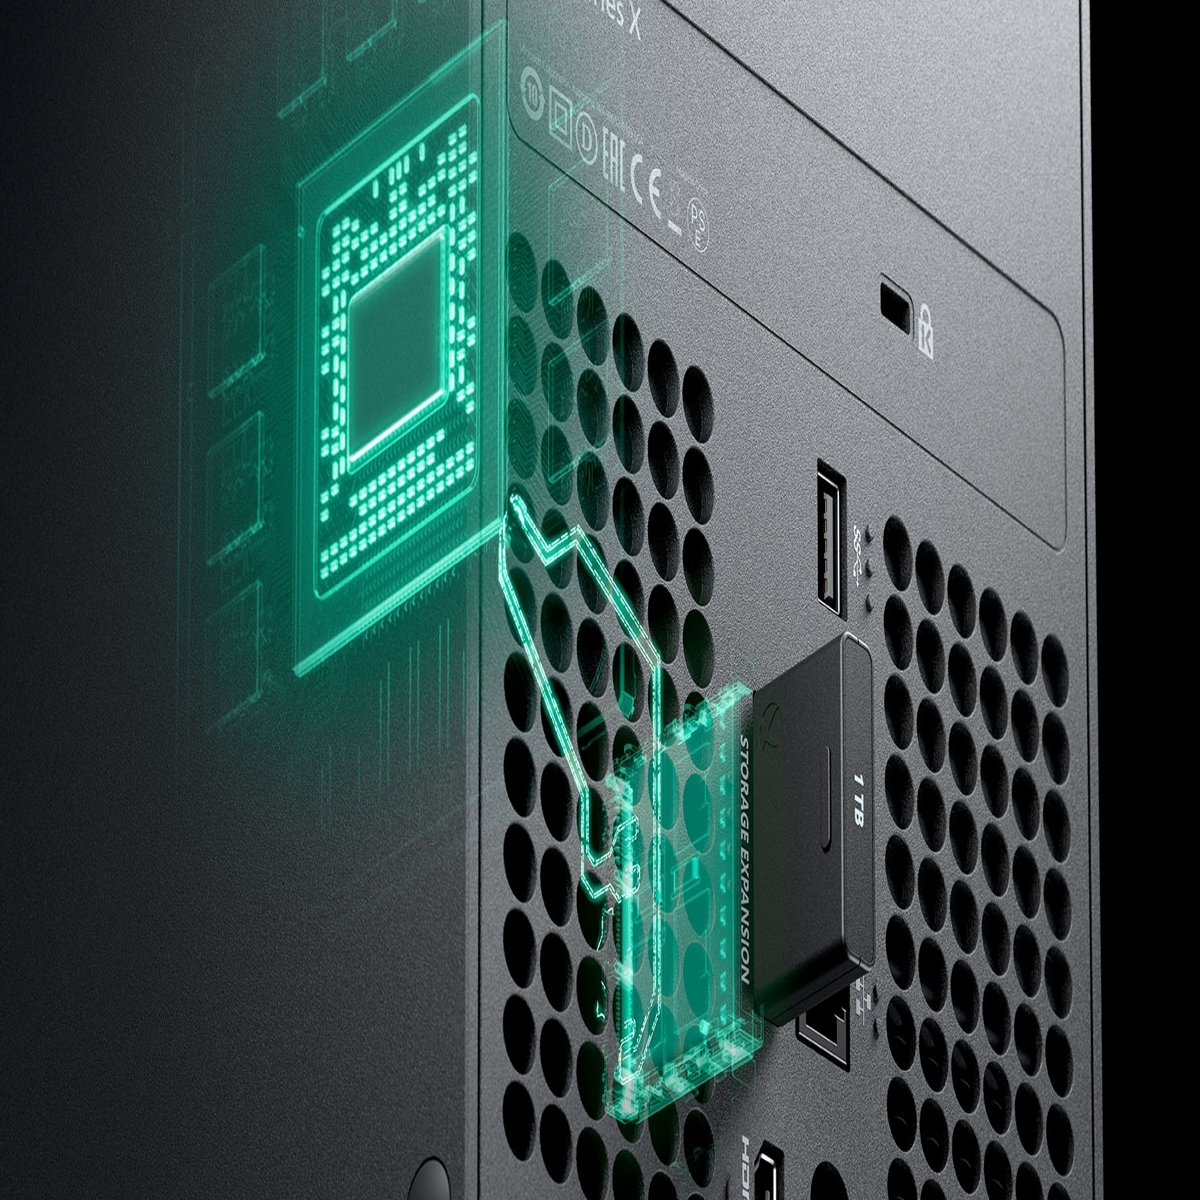 https://assetsio.reedpopcdn.com/xbox-series-ssd-expansion-card-size-speed-price-6300-1595601498752.jpg?width=1200&height=1200&fit=crop&quality=100&format=png&enable=upscale&auto=webp